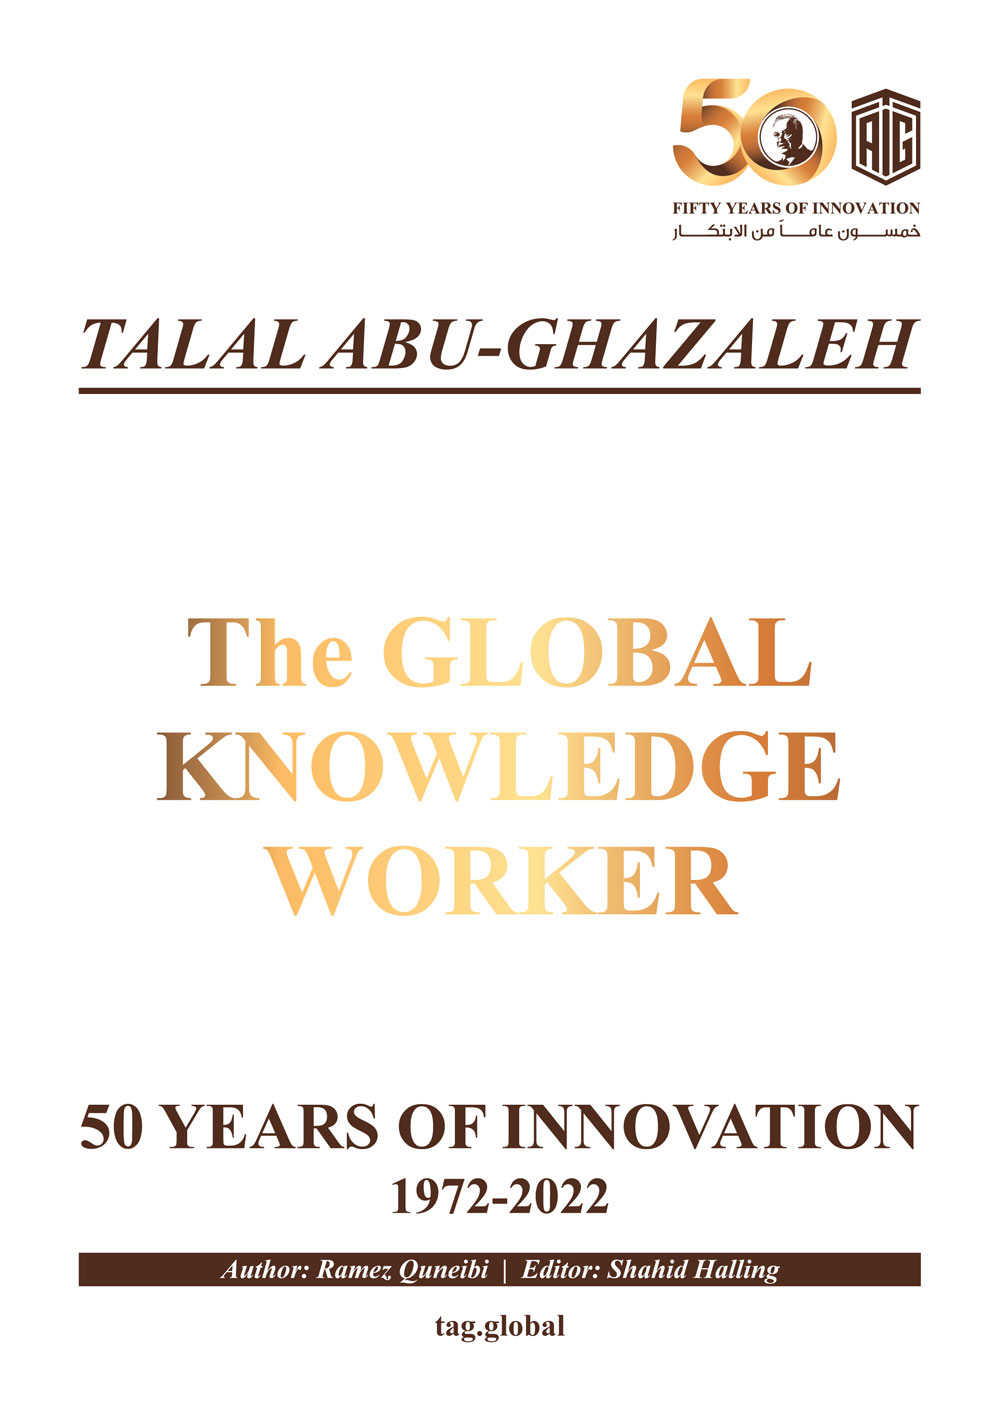 The Global Knowledge Worker